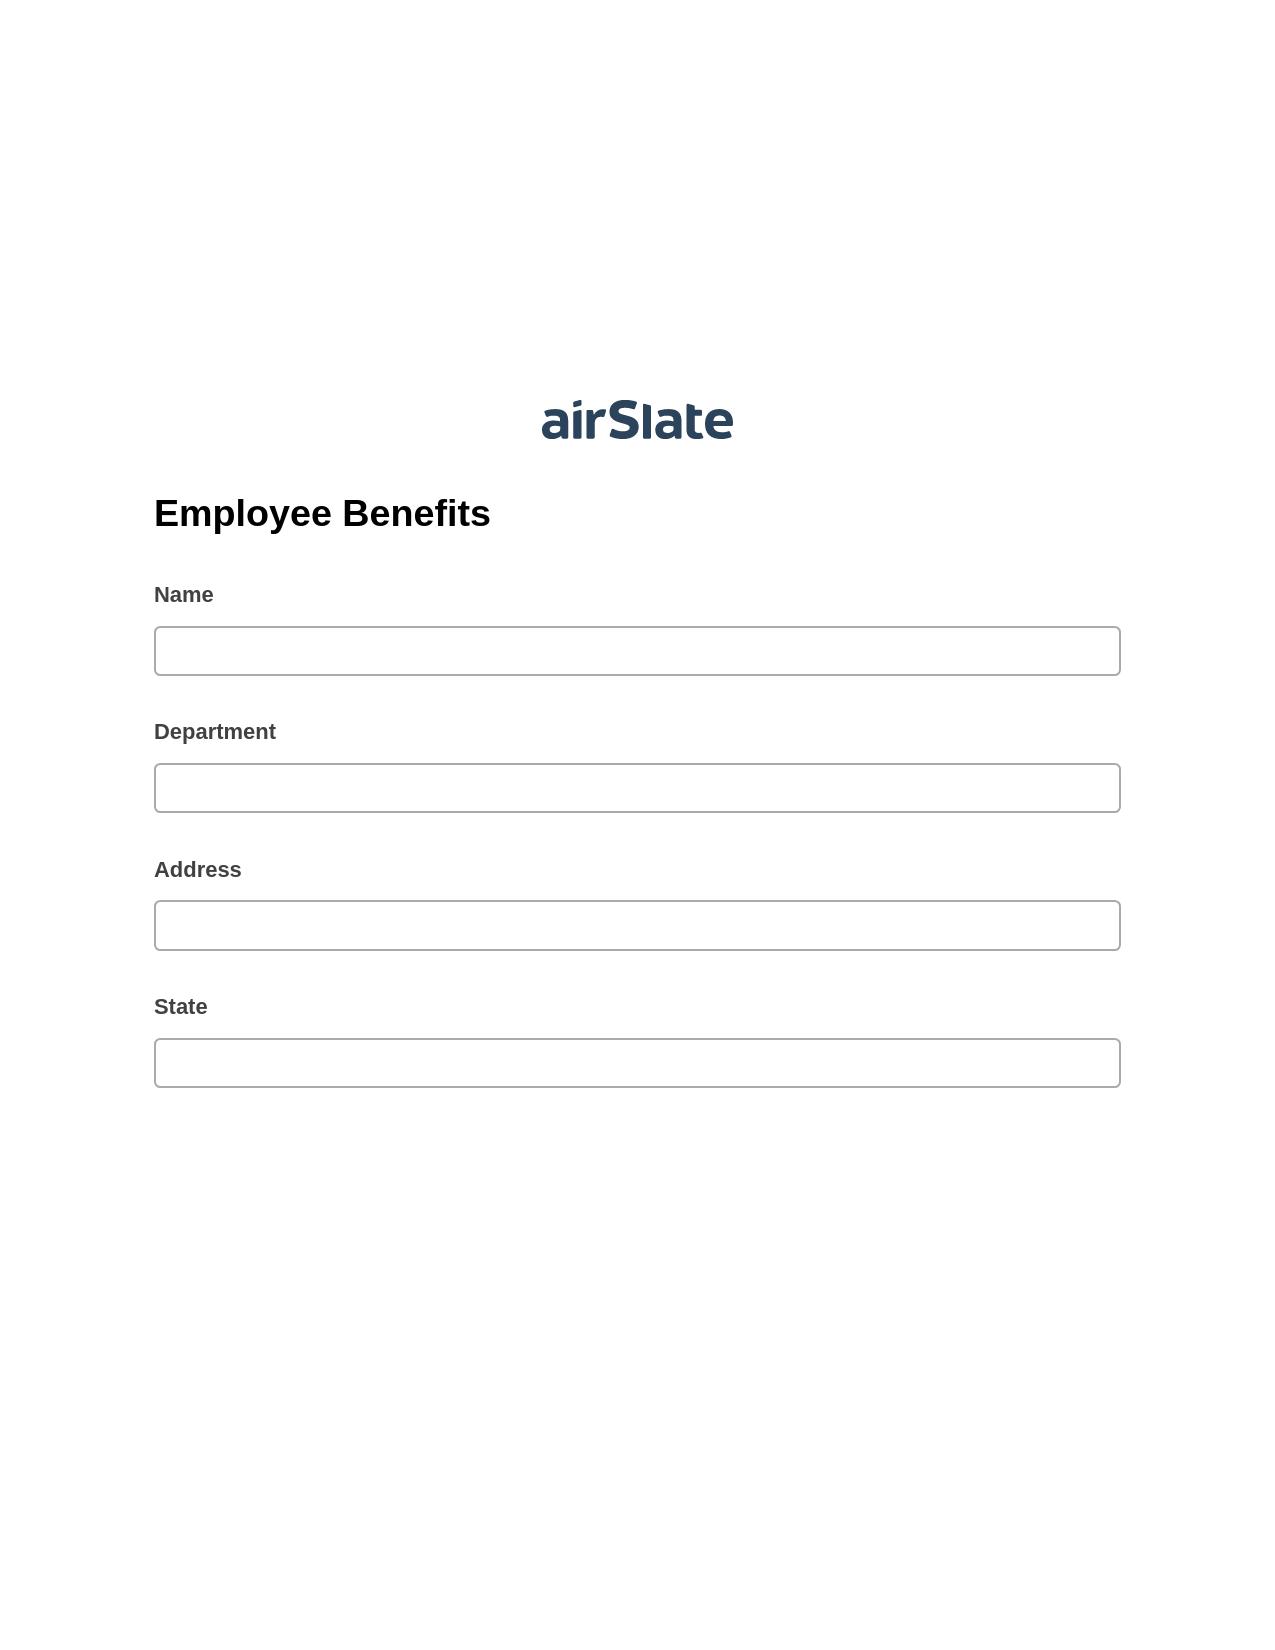 Employee Benefits Pre-fill from CSV File Bot, Export to MS Dynamics 365 Bot, Export to Formstack Documents Bot